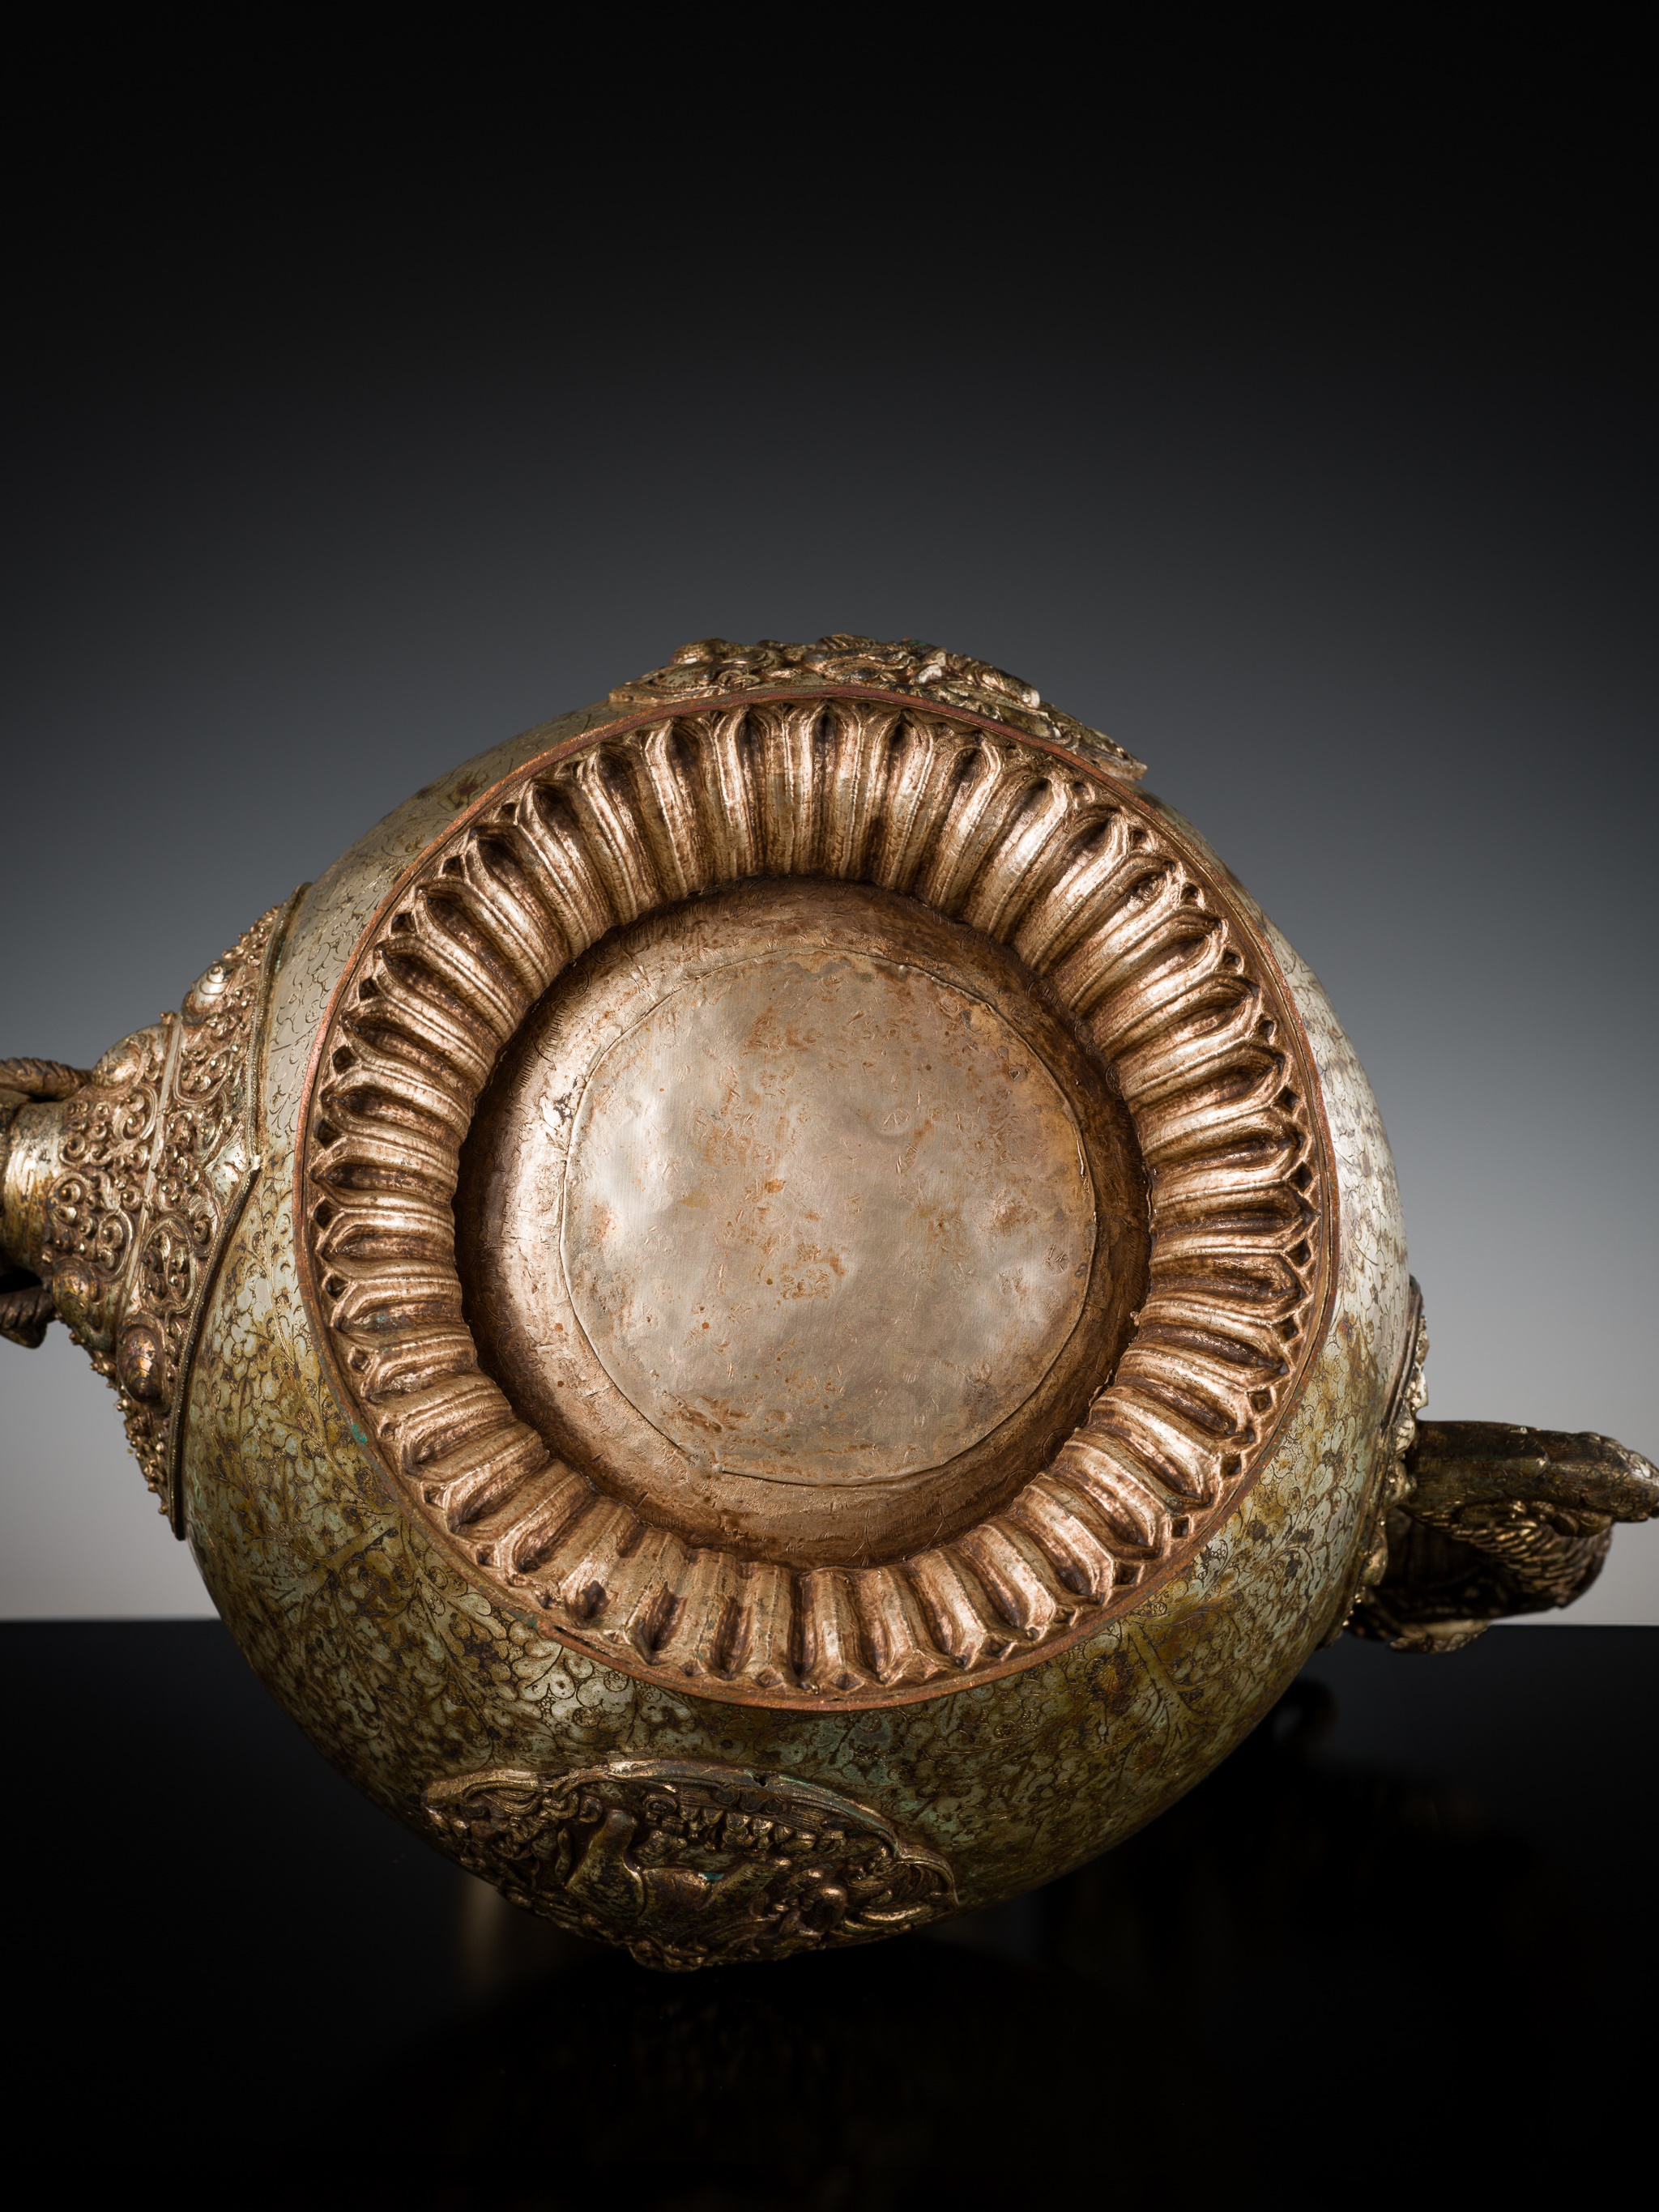 A MASSIVE SILVERED-COPPER RITUAL TEAPOT AND COVER, TIBET, 19TH CENTURY - Image 15 of 15